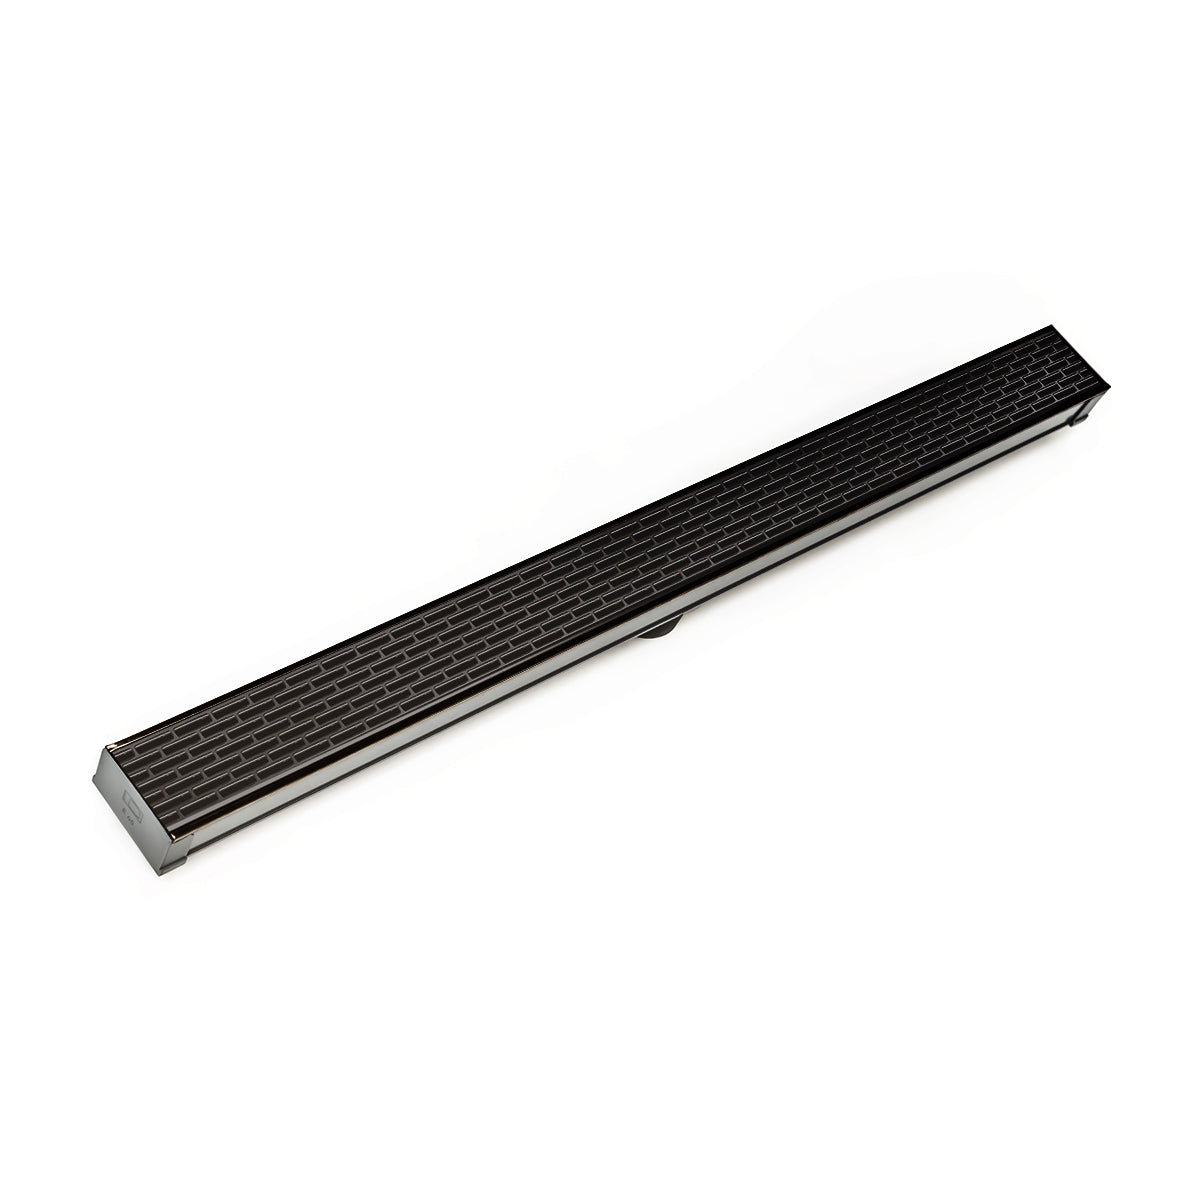 Infinity Drain 48" S-PVC Series Low Profile Site Sizable Linear Drain Kit with 2 1/2" Perforated Offset Slot Grate